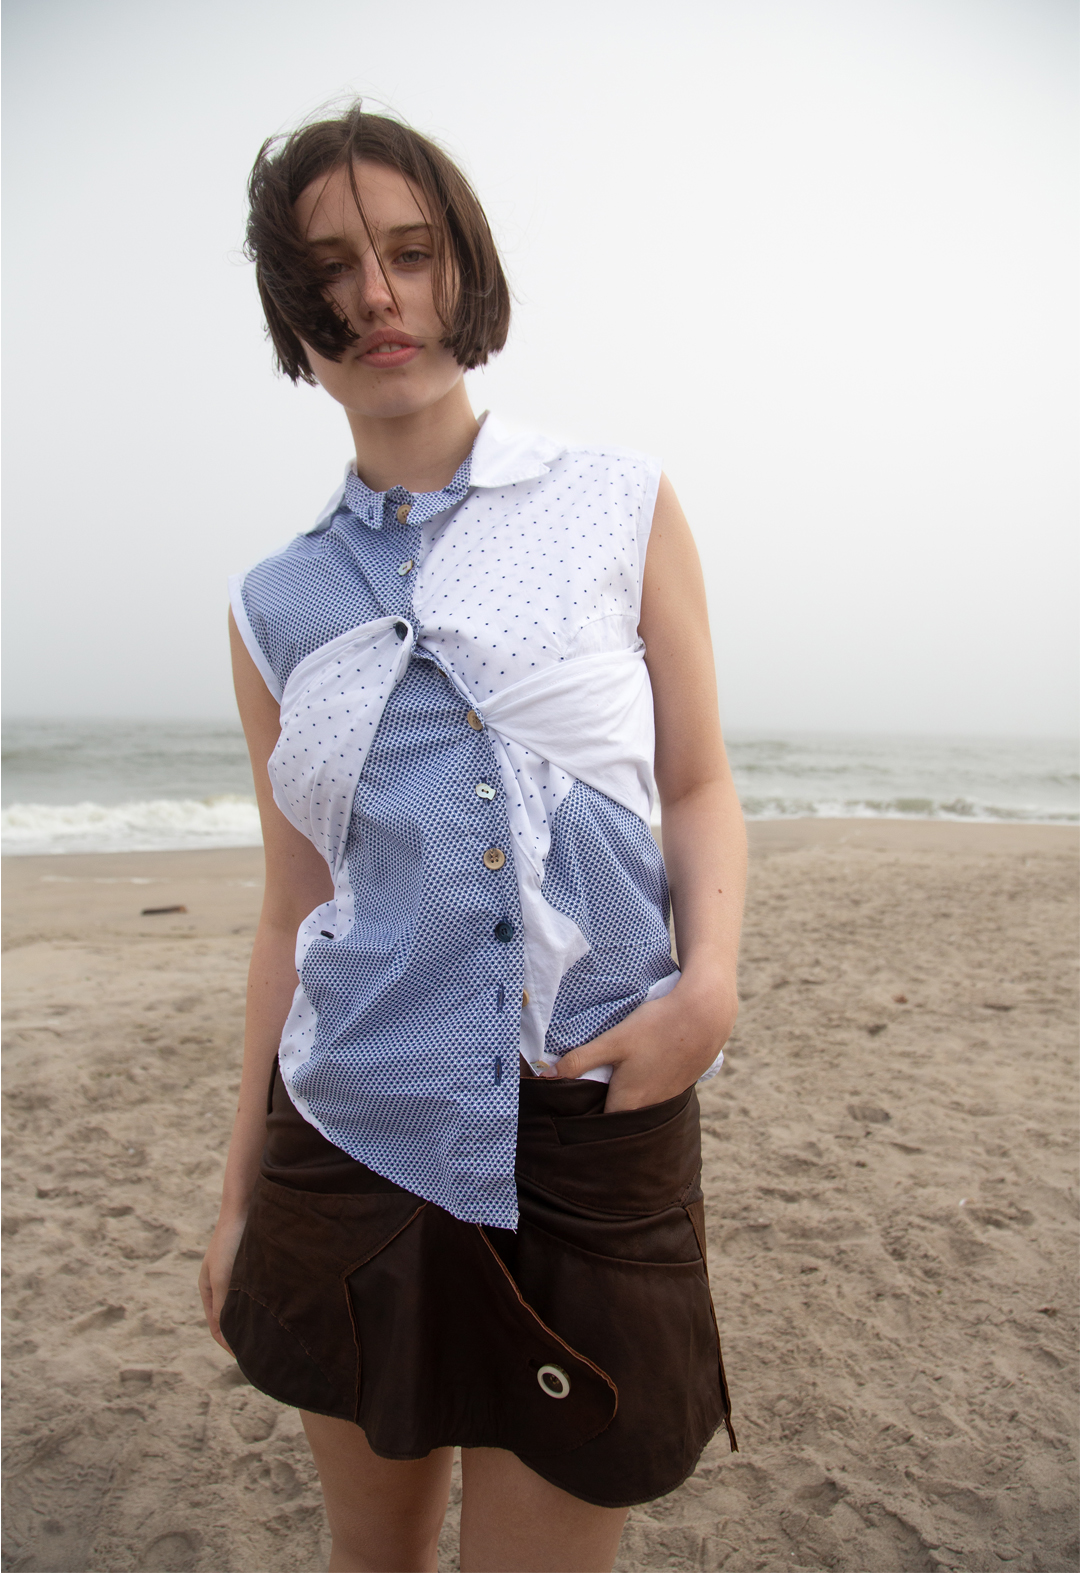 A model wears a blue-and-white muti-print button-up top that detaches from the shoulders and buttons into the center front buttons. Each button is either a brown or blue wooden button or a fish-shaped mother-of-pearl button. The top is paired with a wrap-around dark-brown leather skirt constructed from fish-shaped pattern pieces. The skirt has both a front and side welt pocket and two large, clear vintage buttons that close the skirt in the front.  